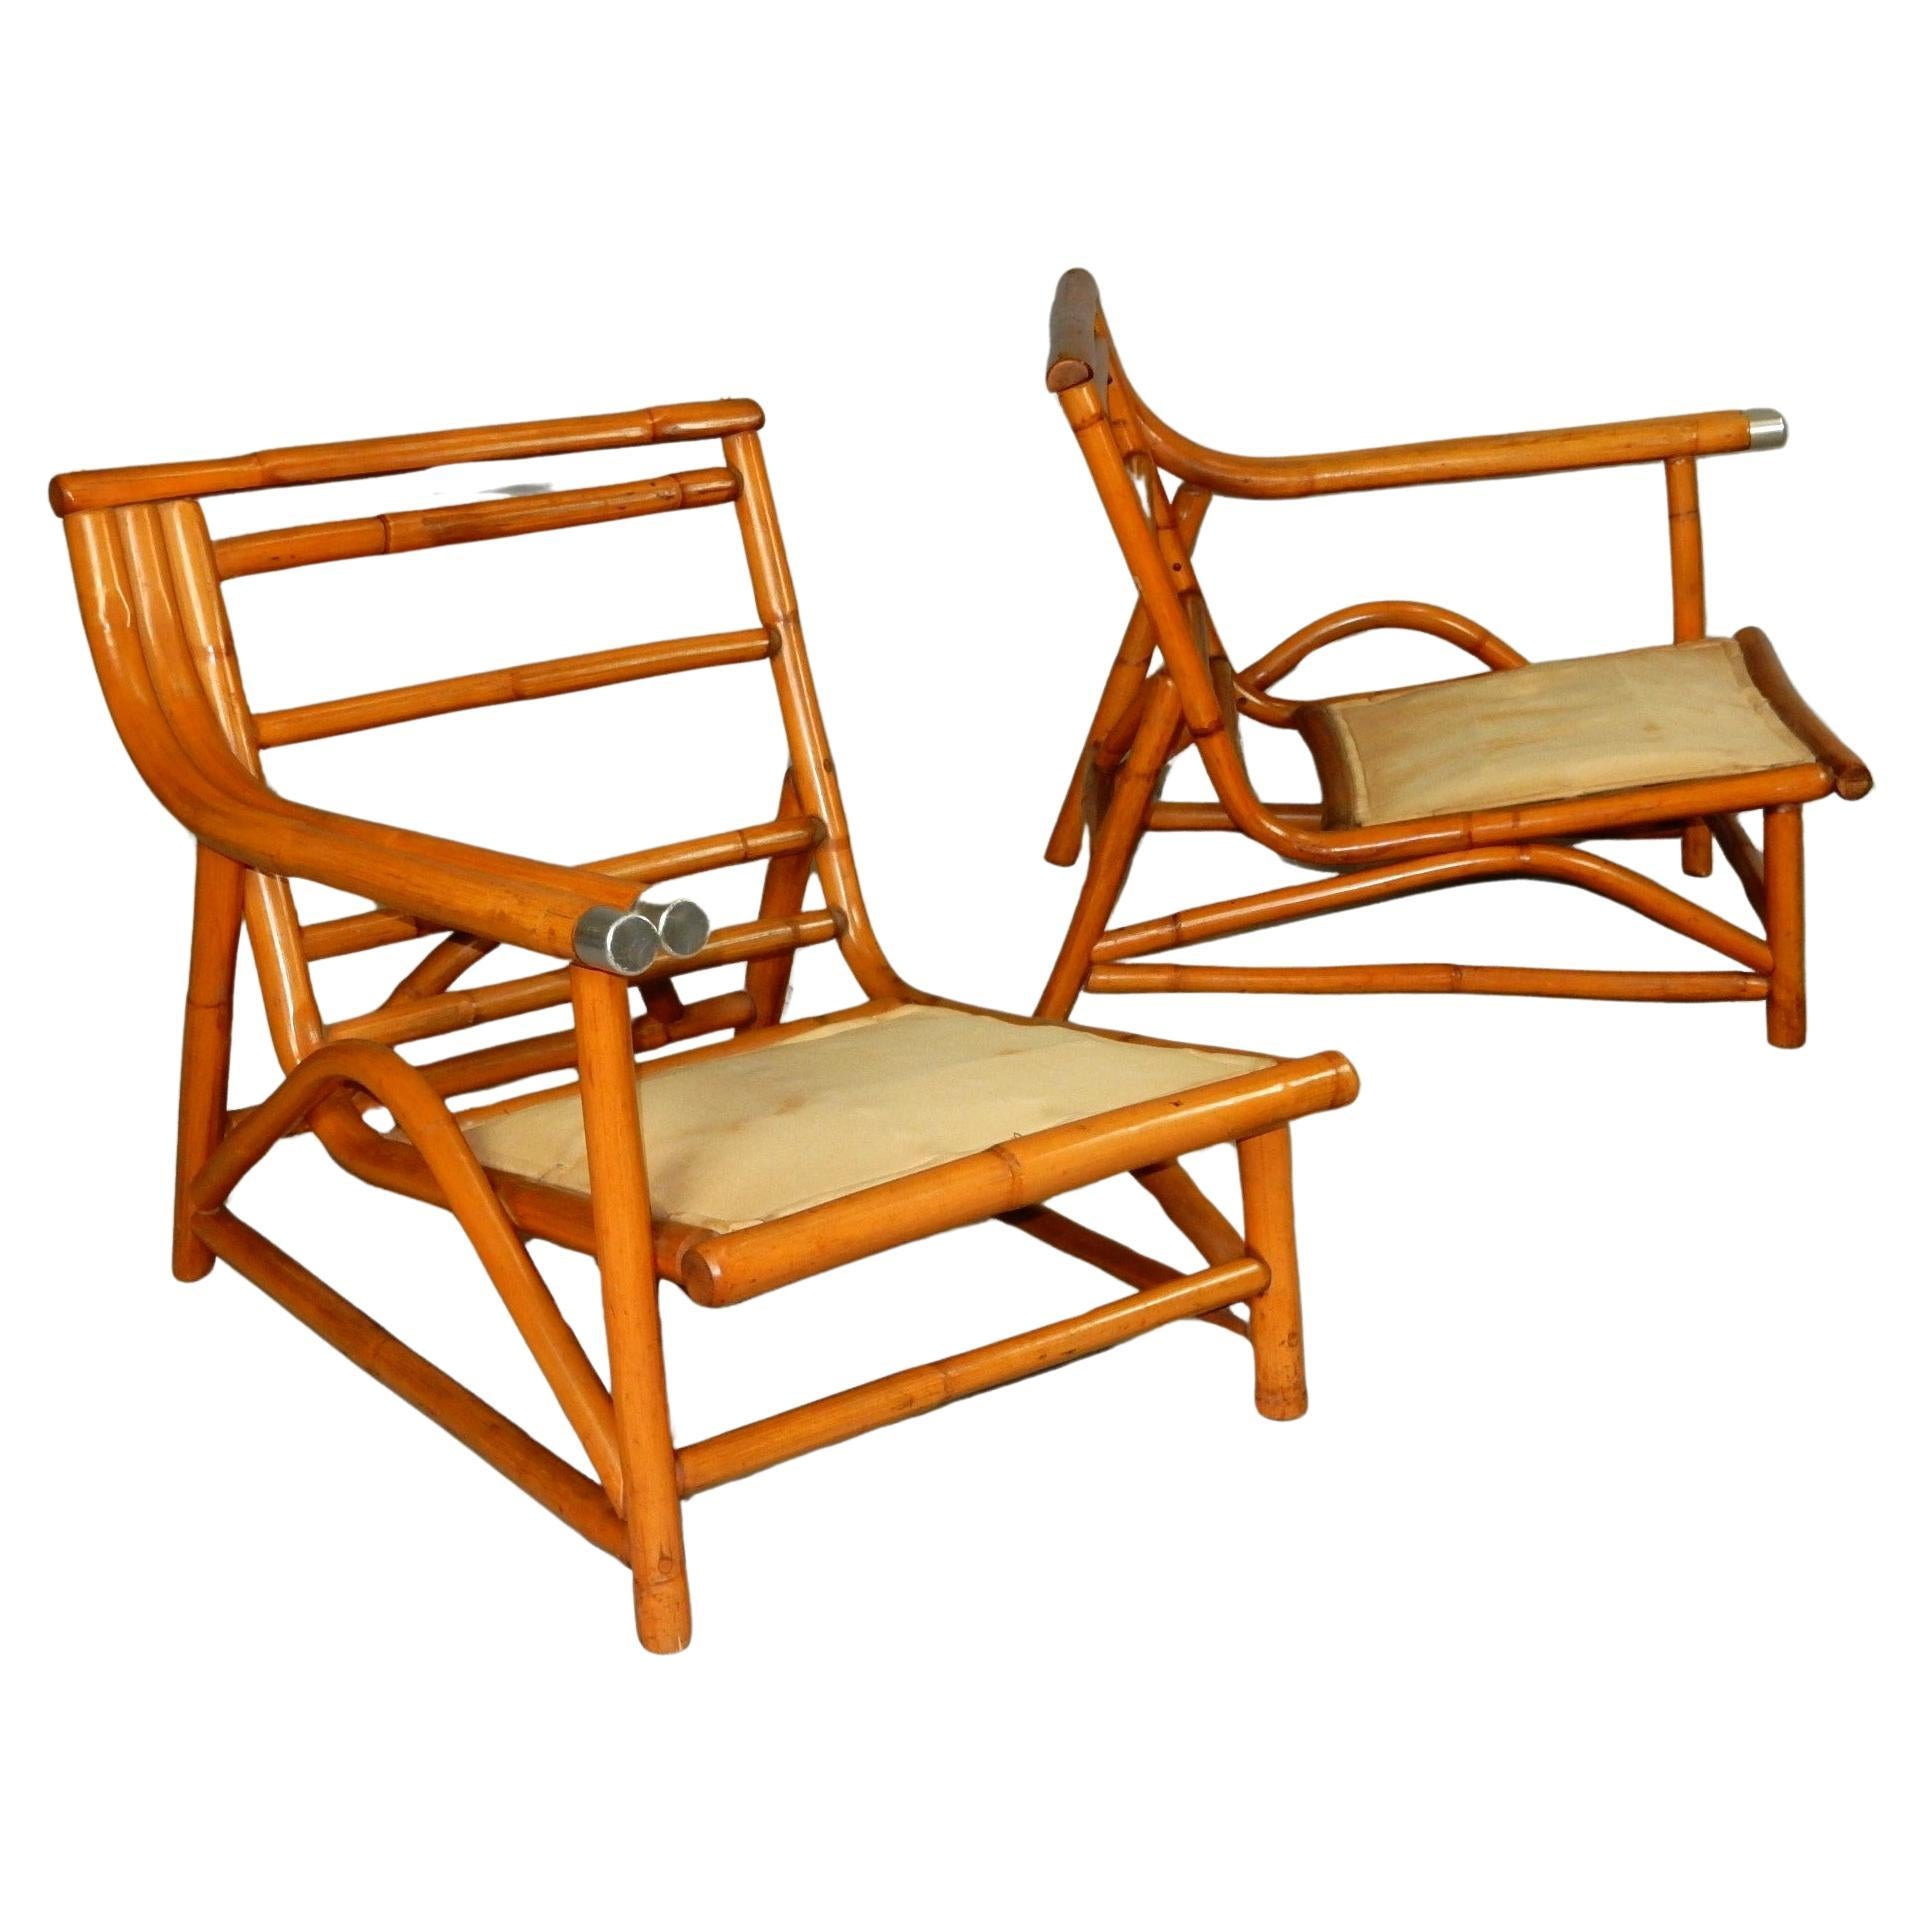 Upholstery 1950's Ficks Reed Rattan Split Settee or Lounge Chairs  For Sale